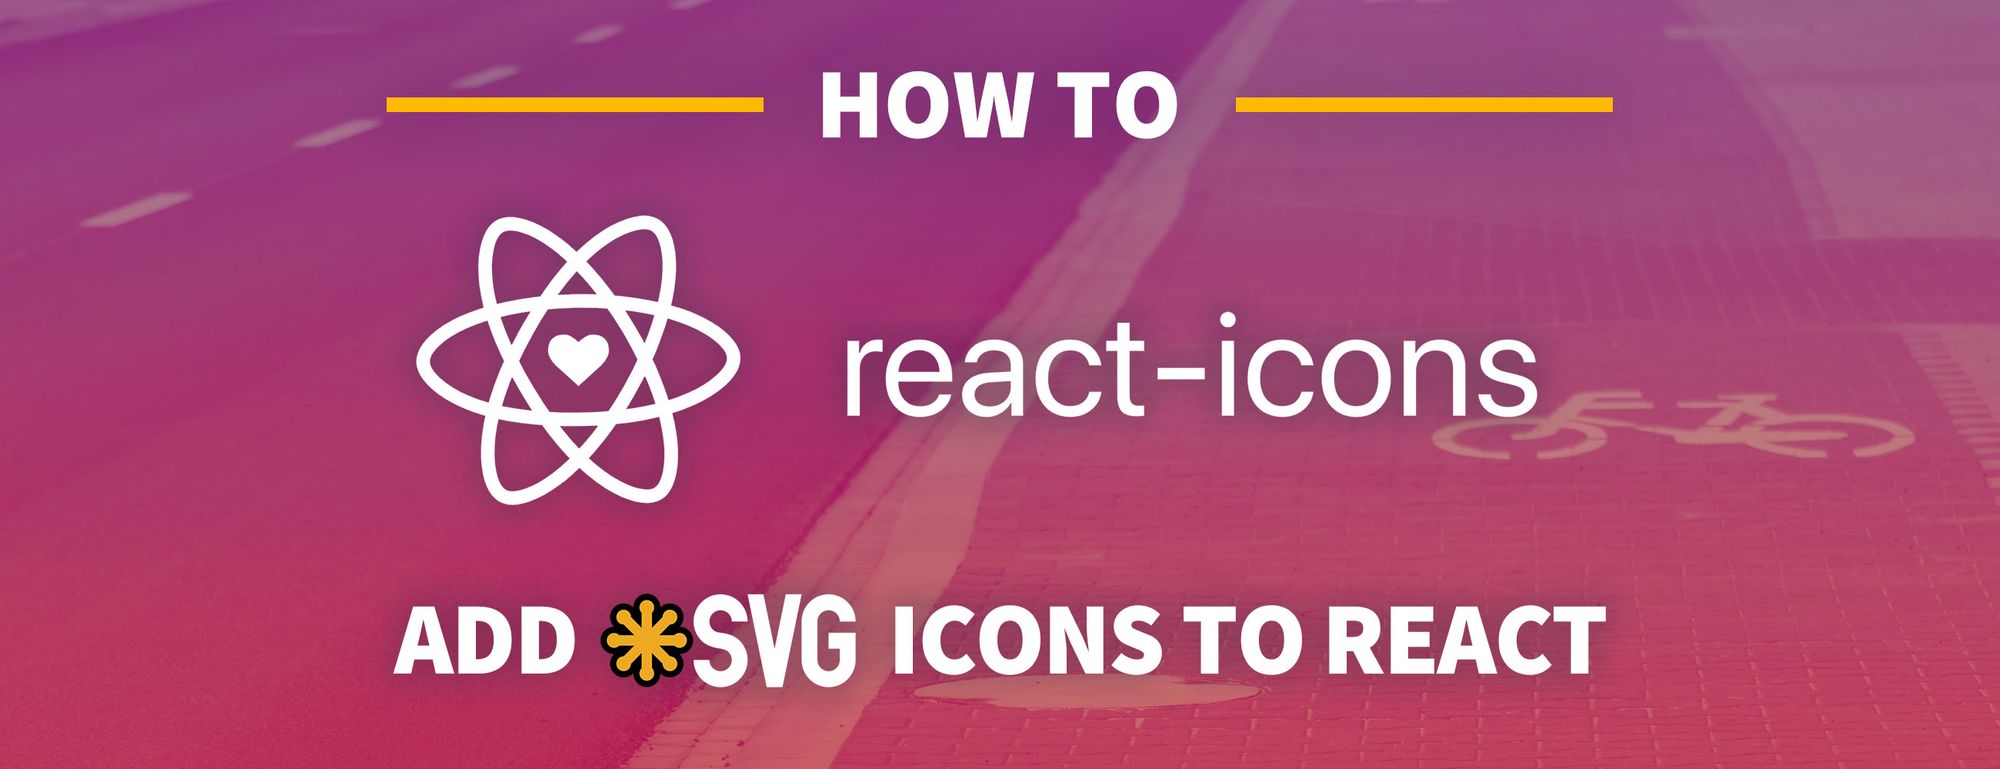 Download How To Use Svg Icons In React With React Icons And Font Awesome